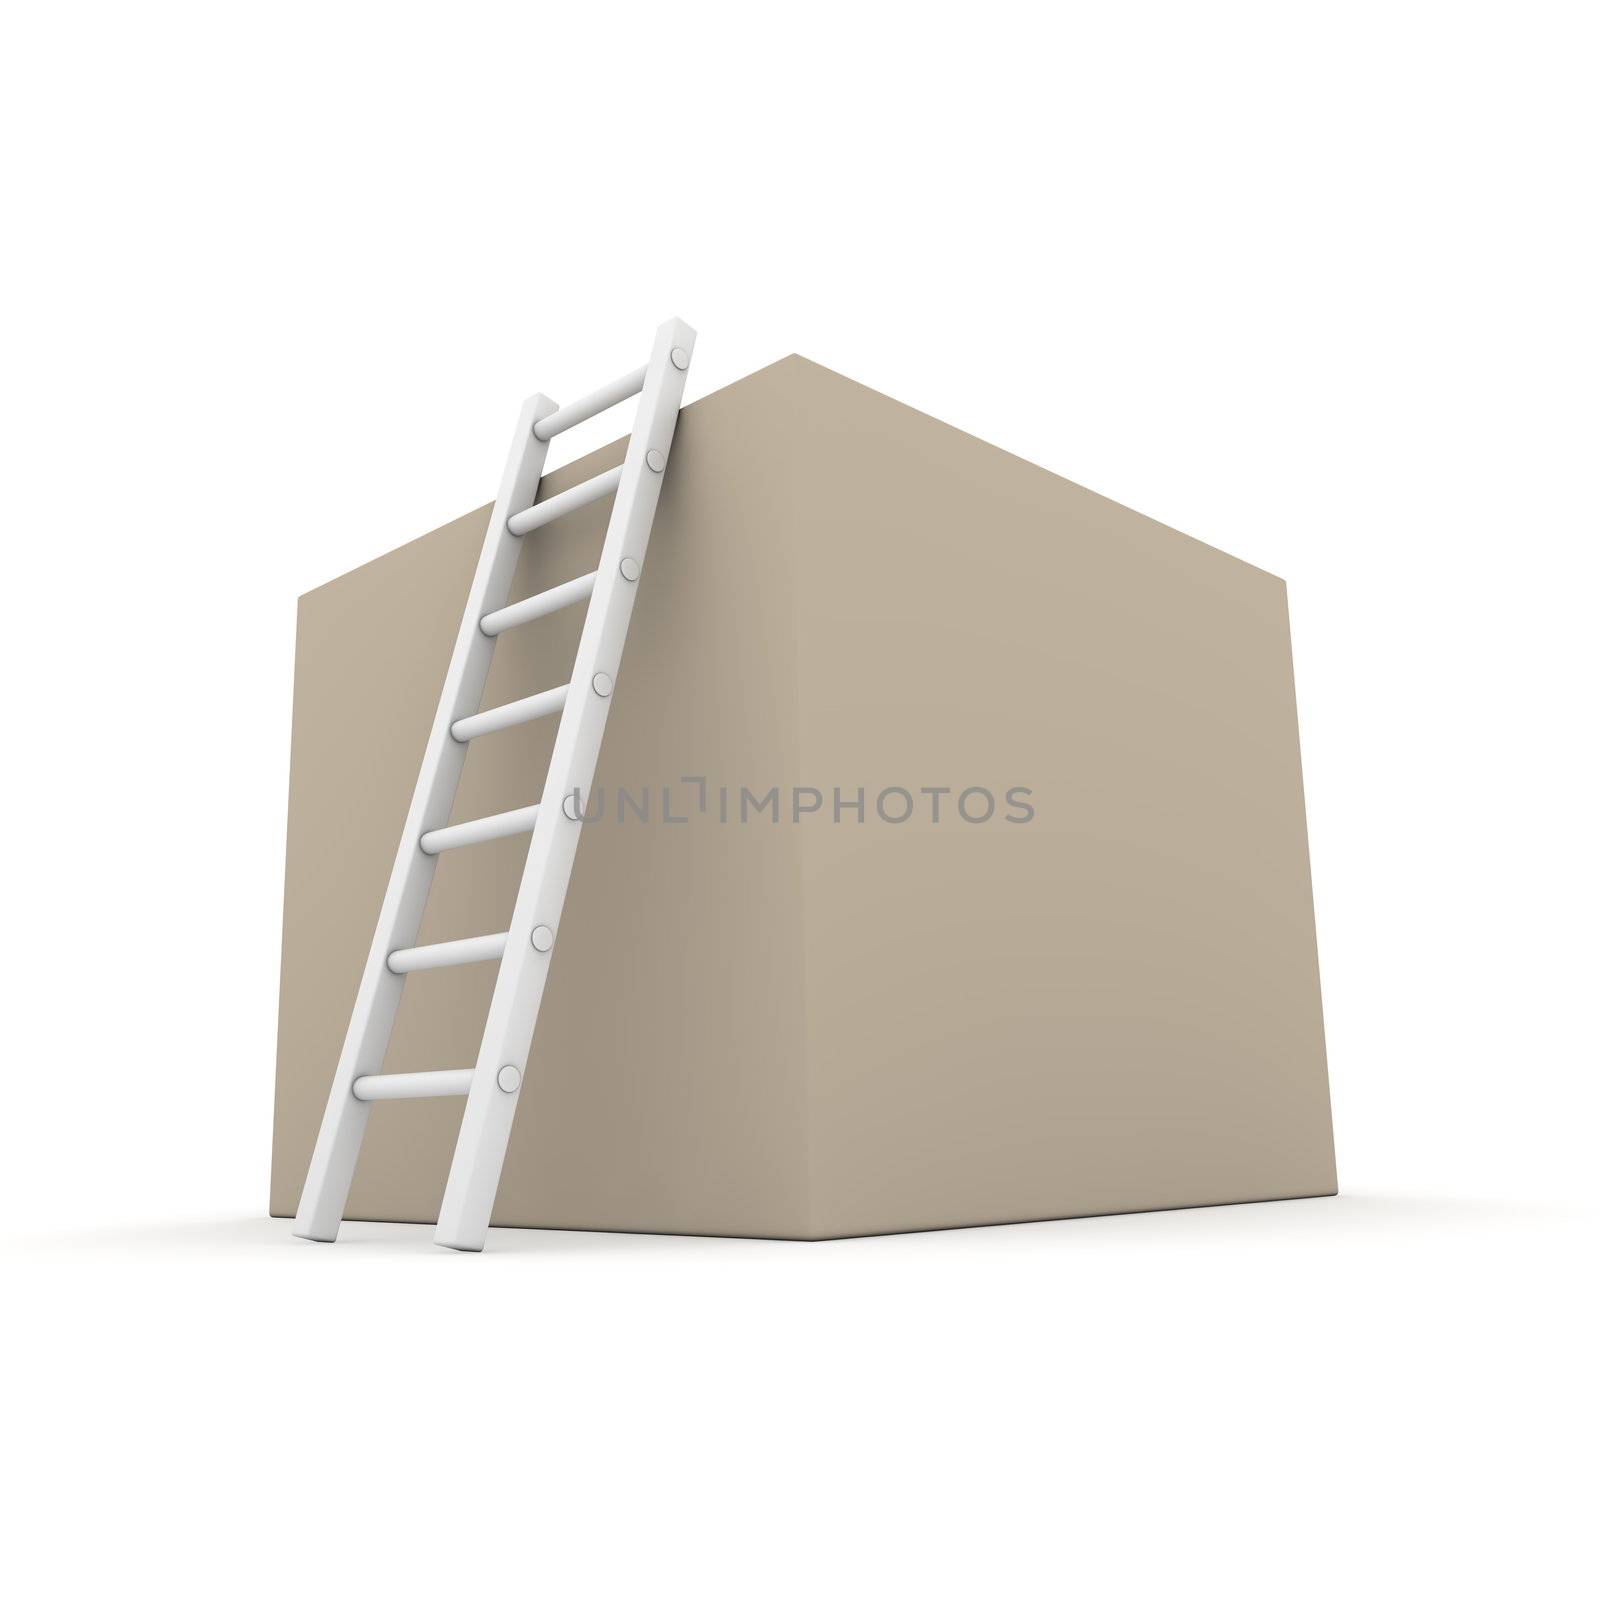 brownish-grey cardboard box with a white ladder to climb to the top